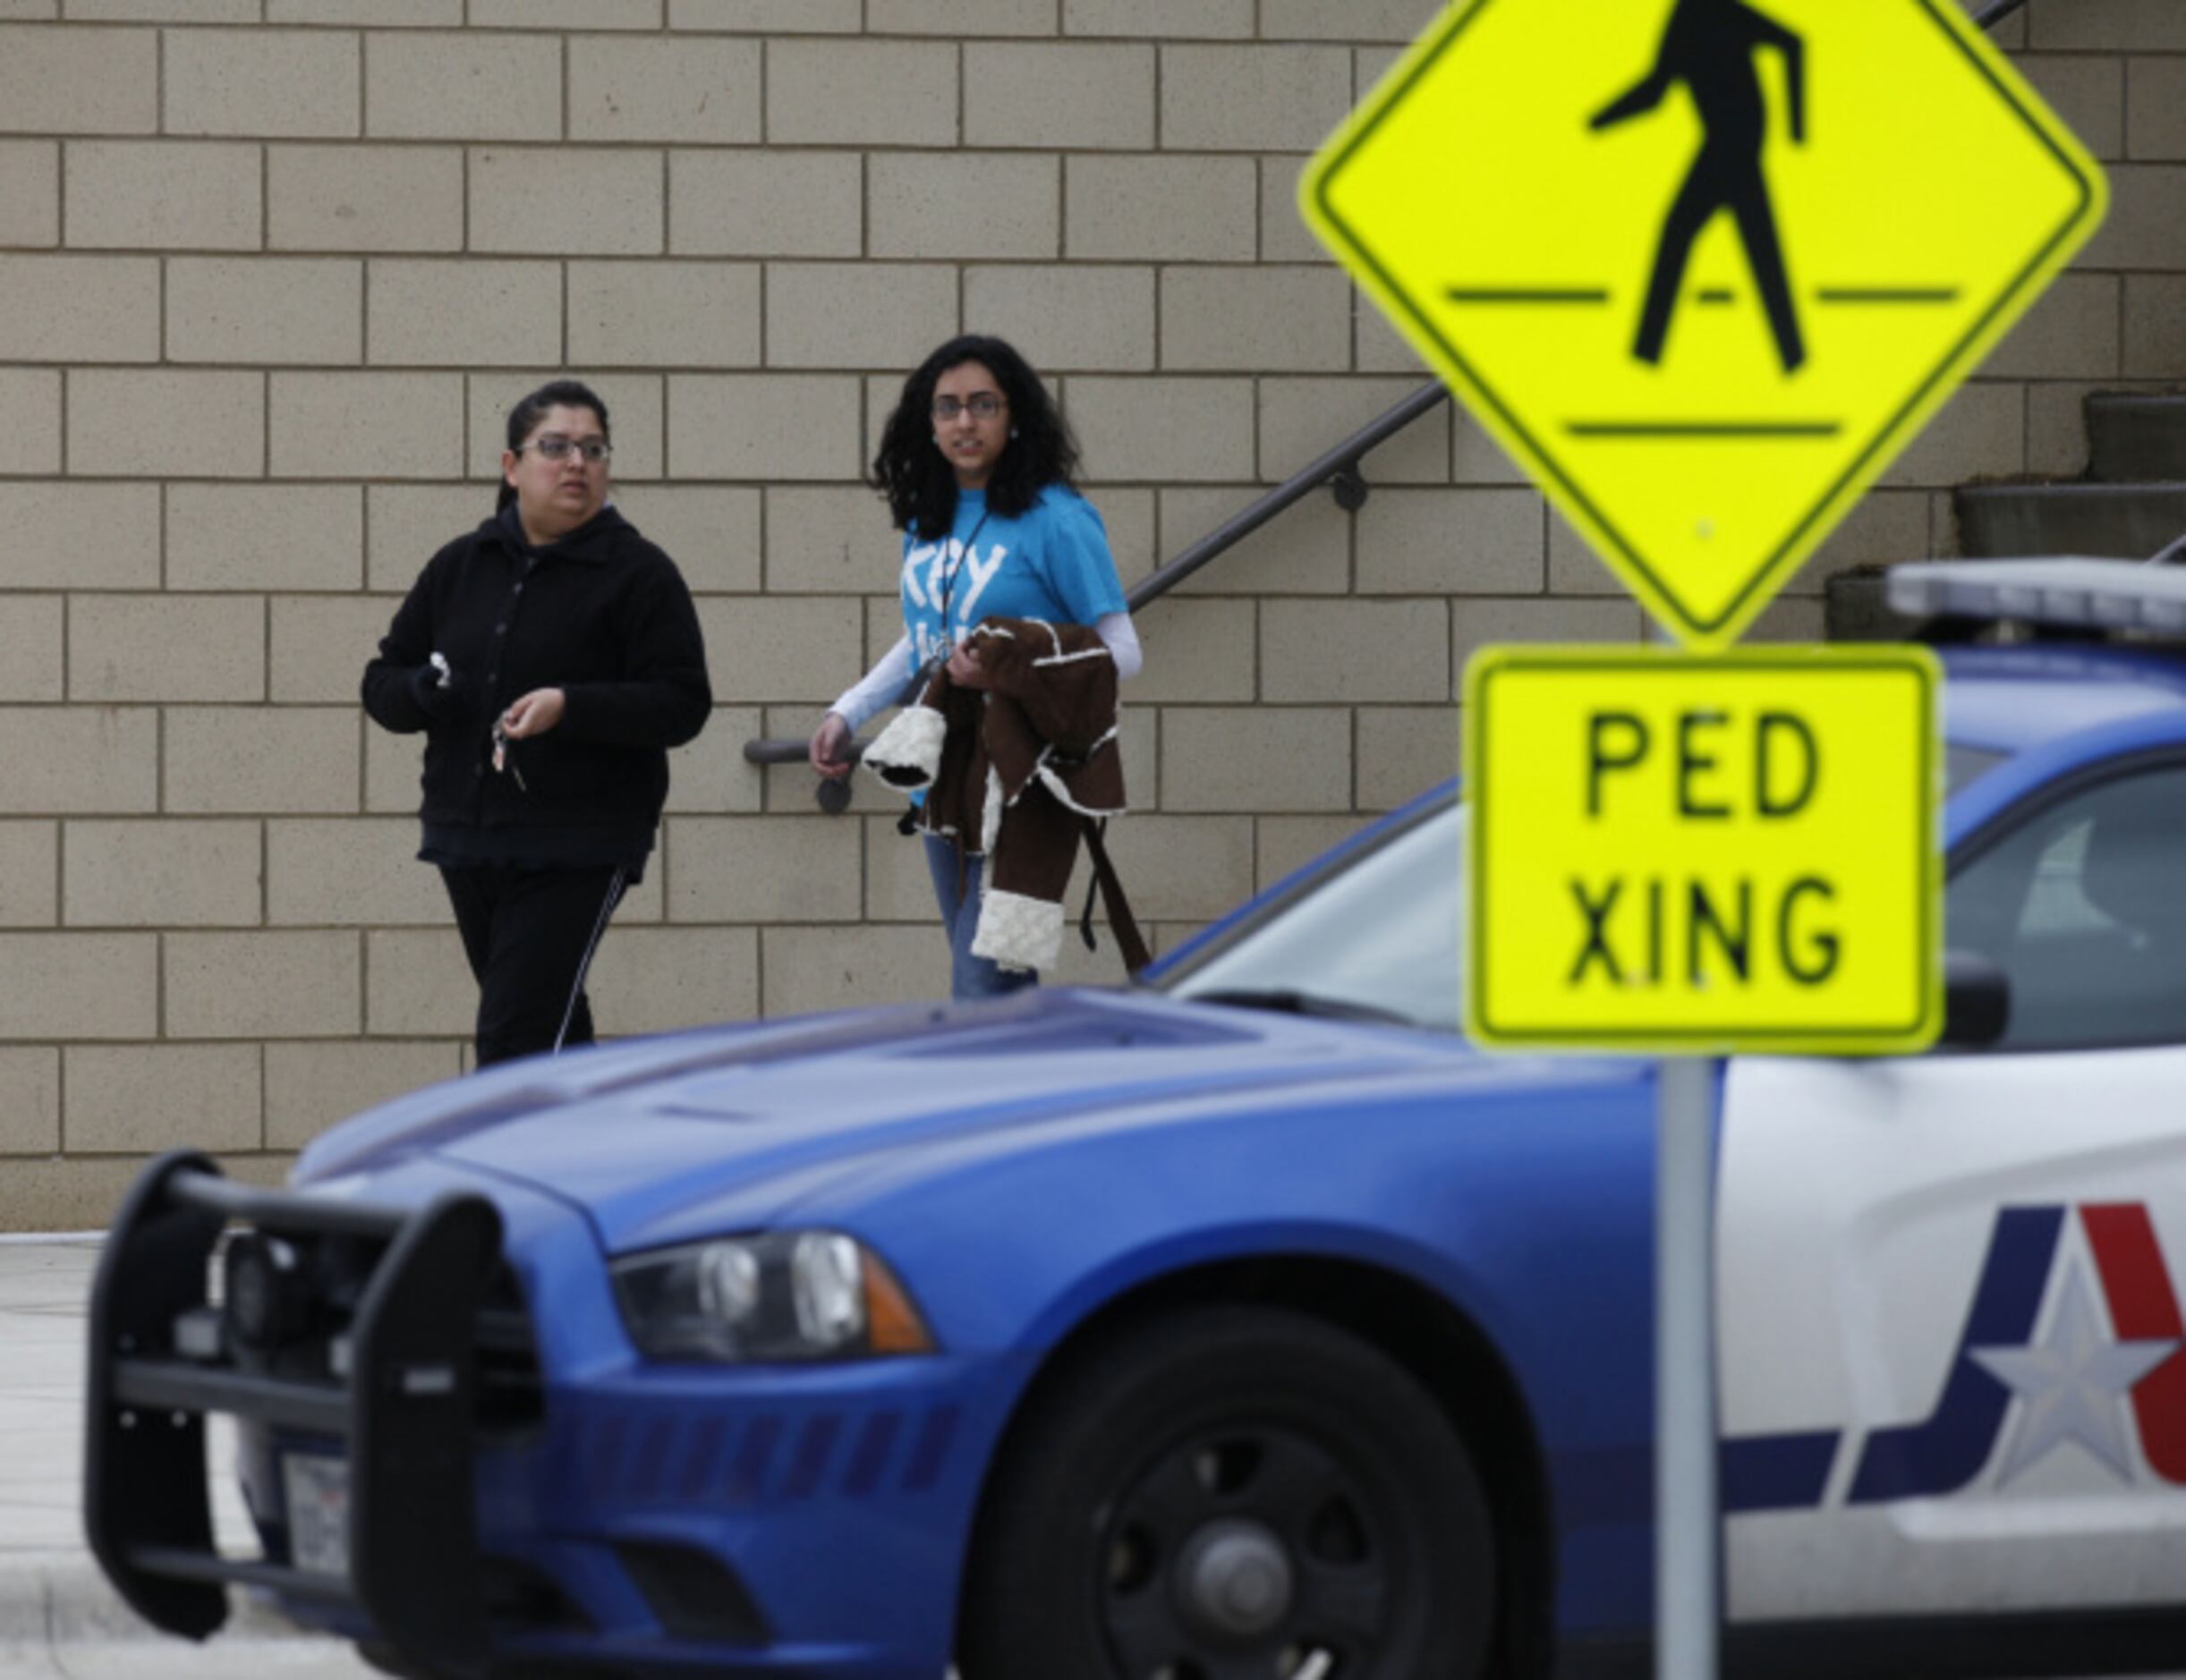 Shaista Ali, walks out of school with her daughter Sonia Ali, a sophomore, after a lockdown...